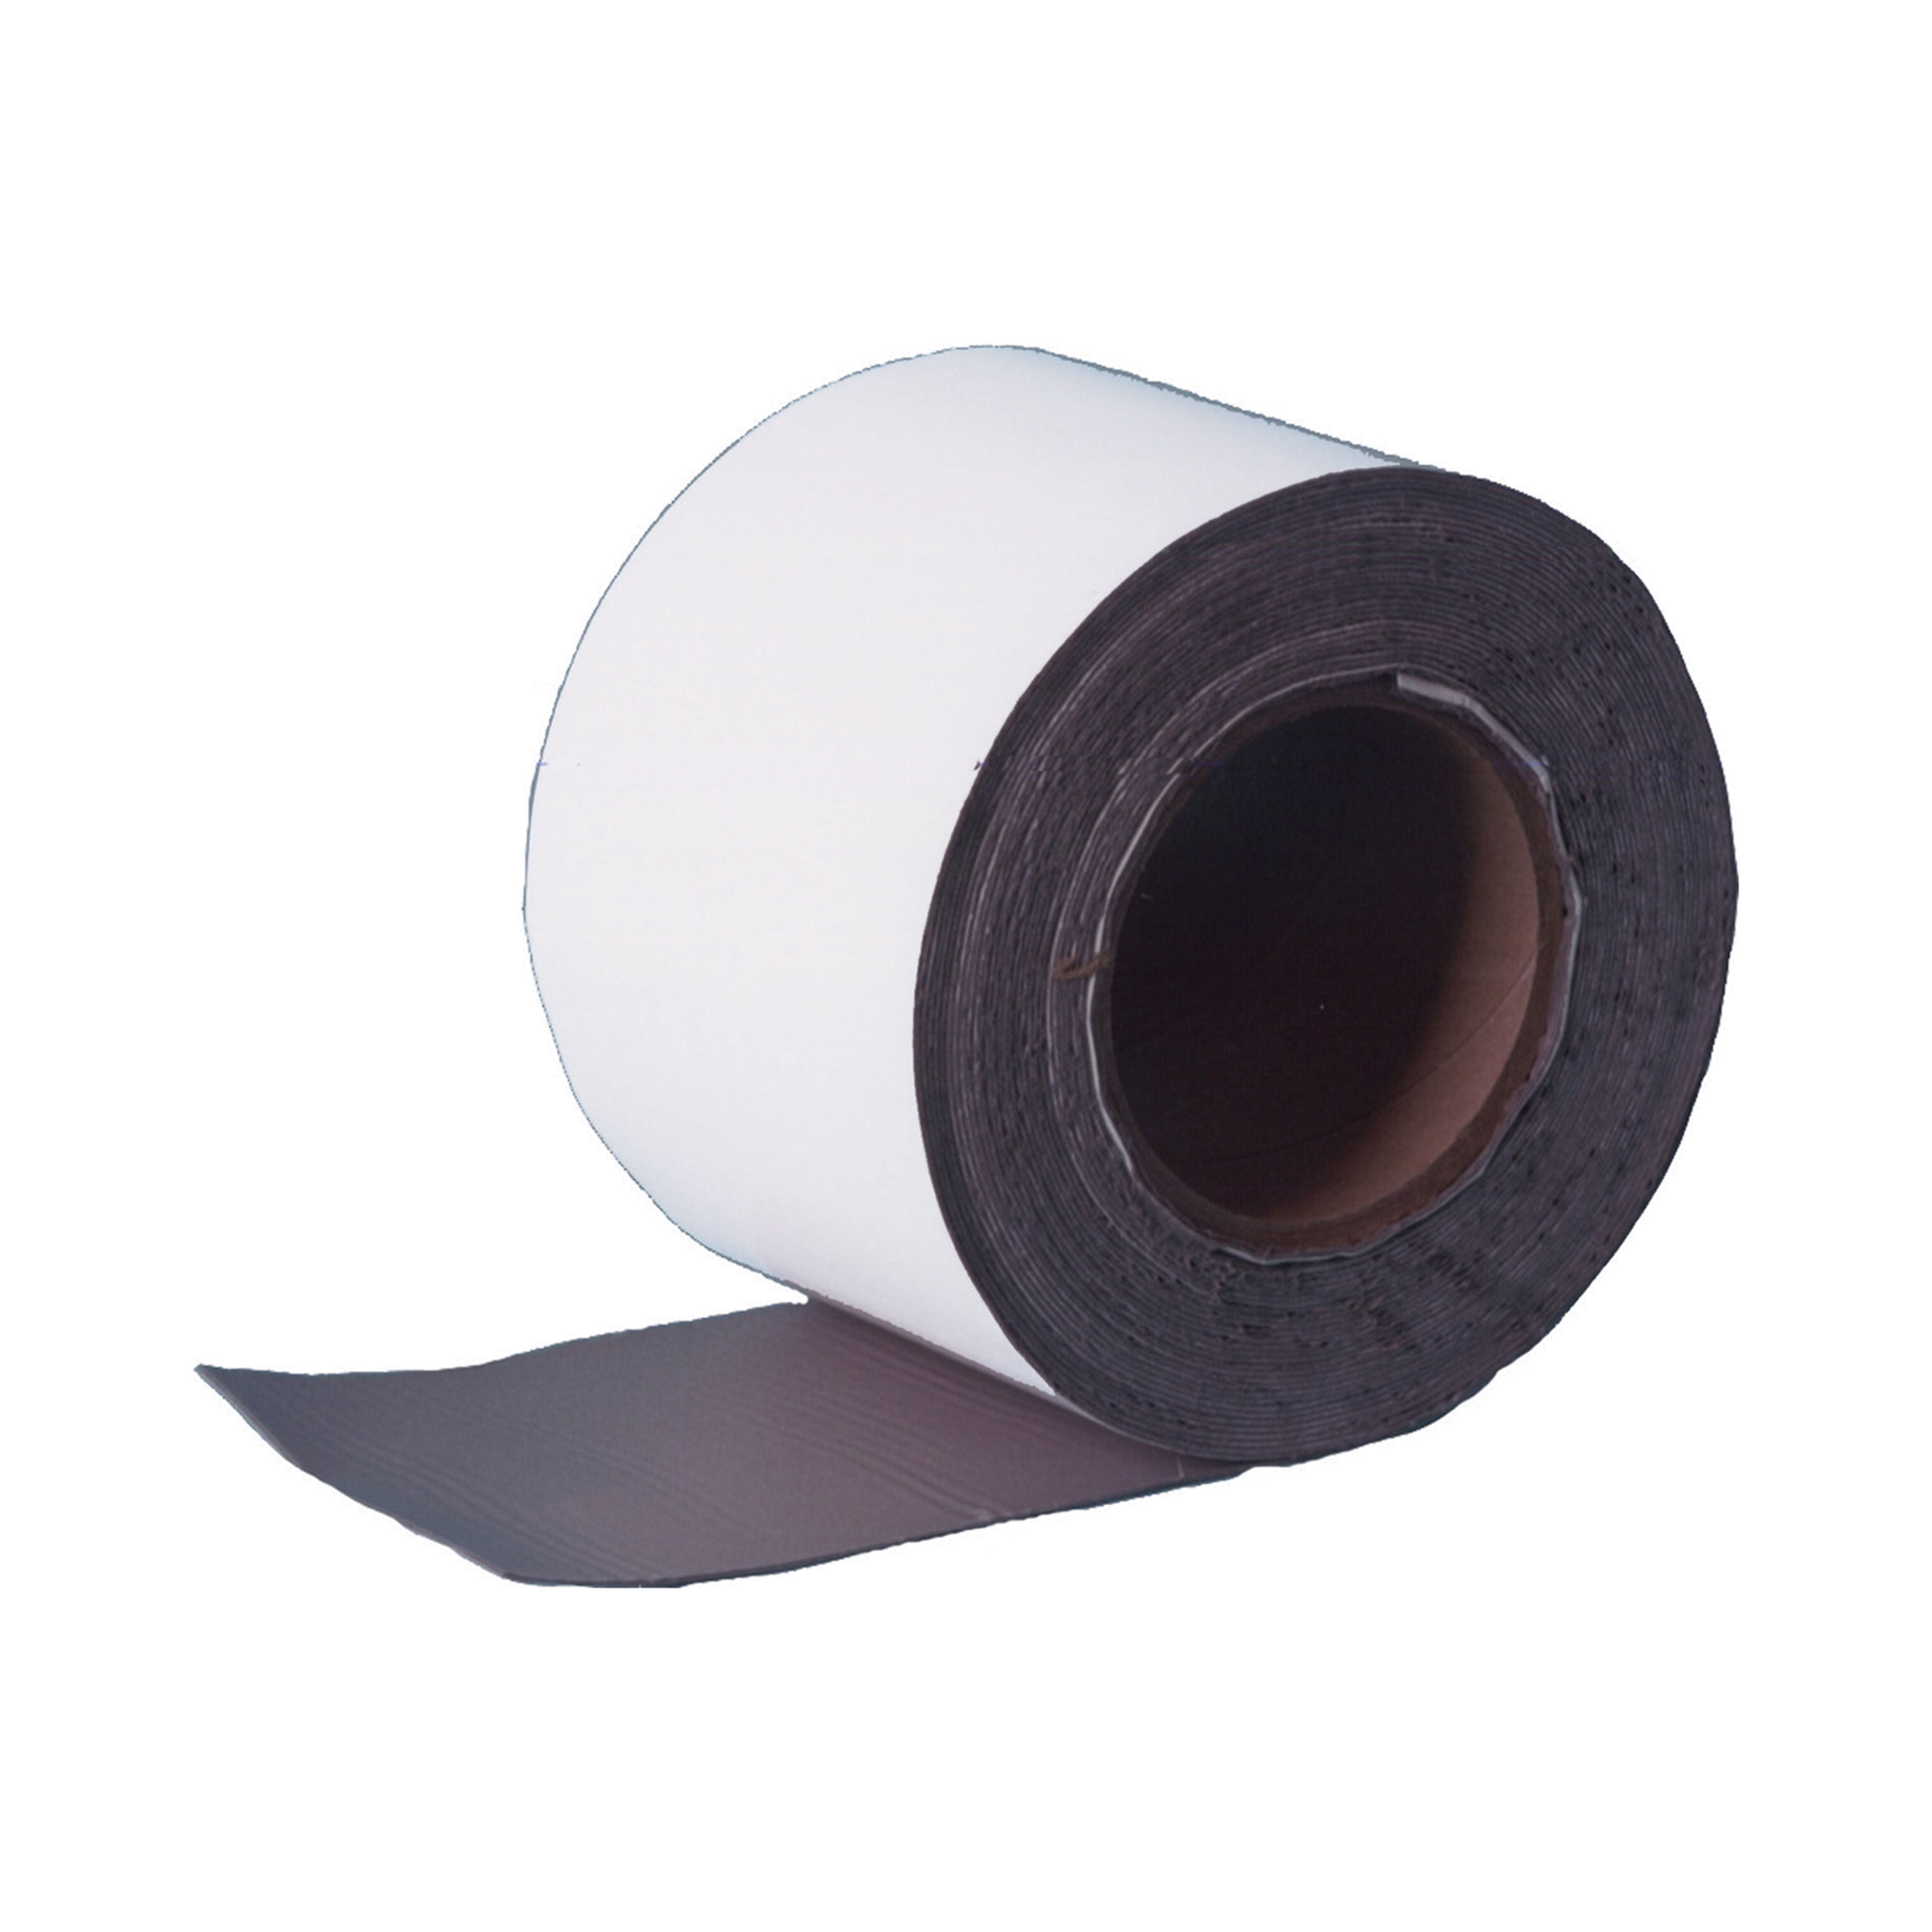 4 x 10 feet Eternabond RSW-4 Roof Seal Leak Repair Roof RV Shed Vinyl Tape Patch Seal WHITE by Ubrewusa